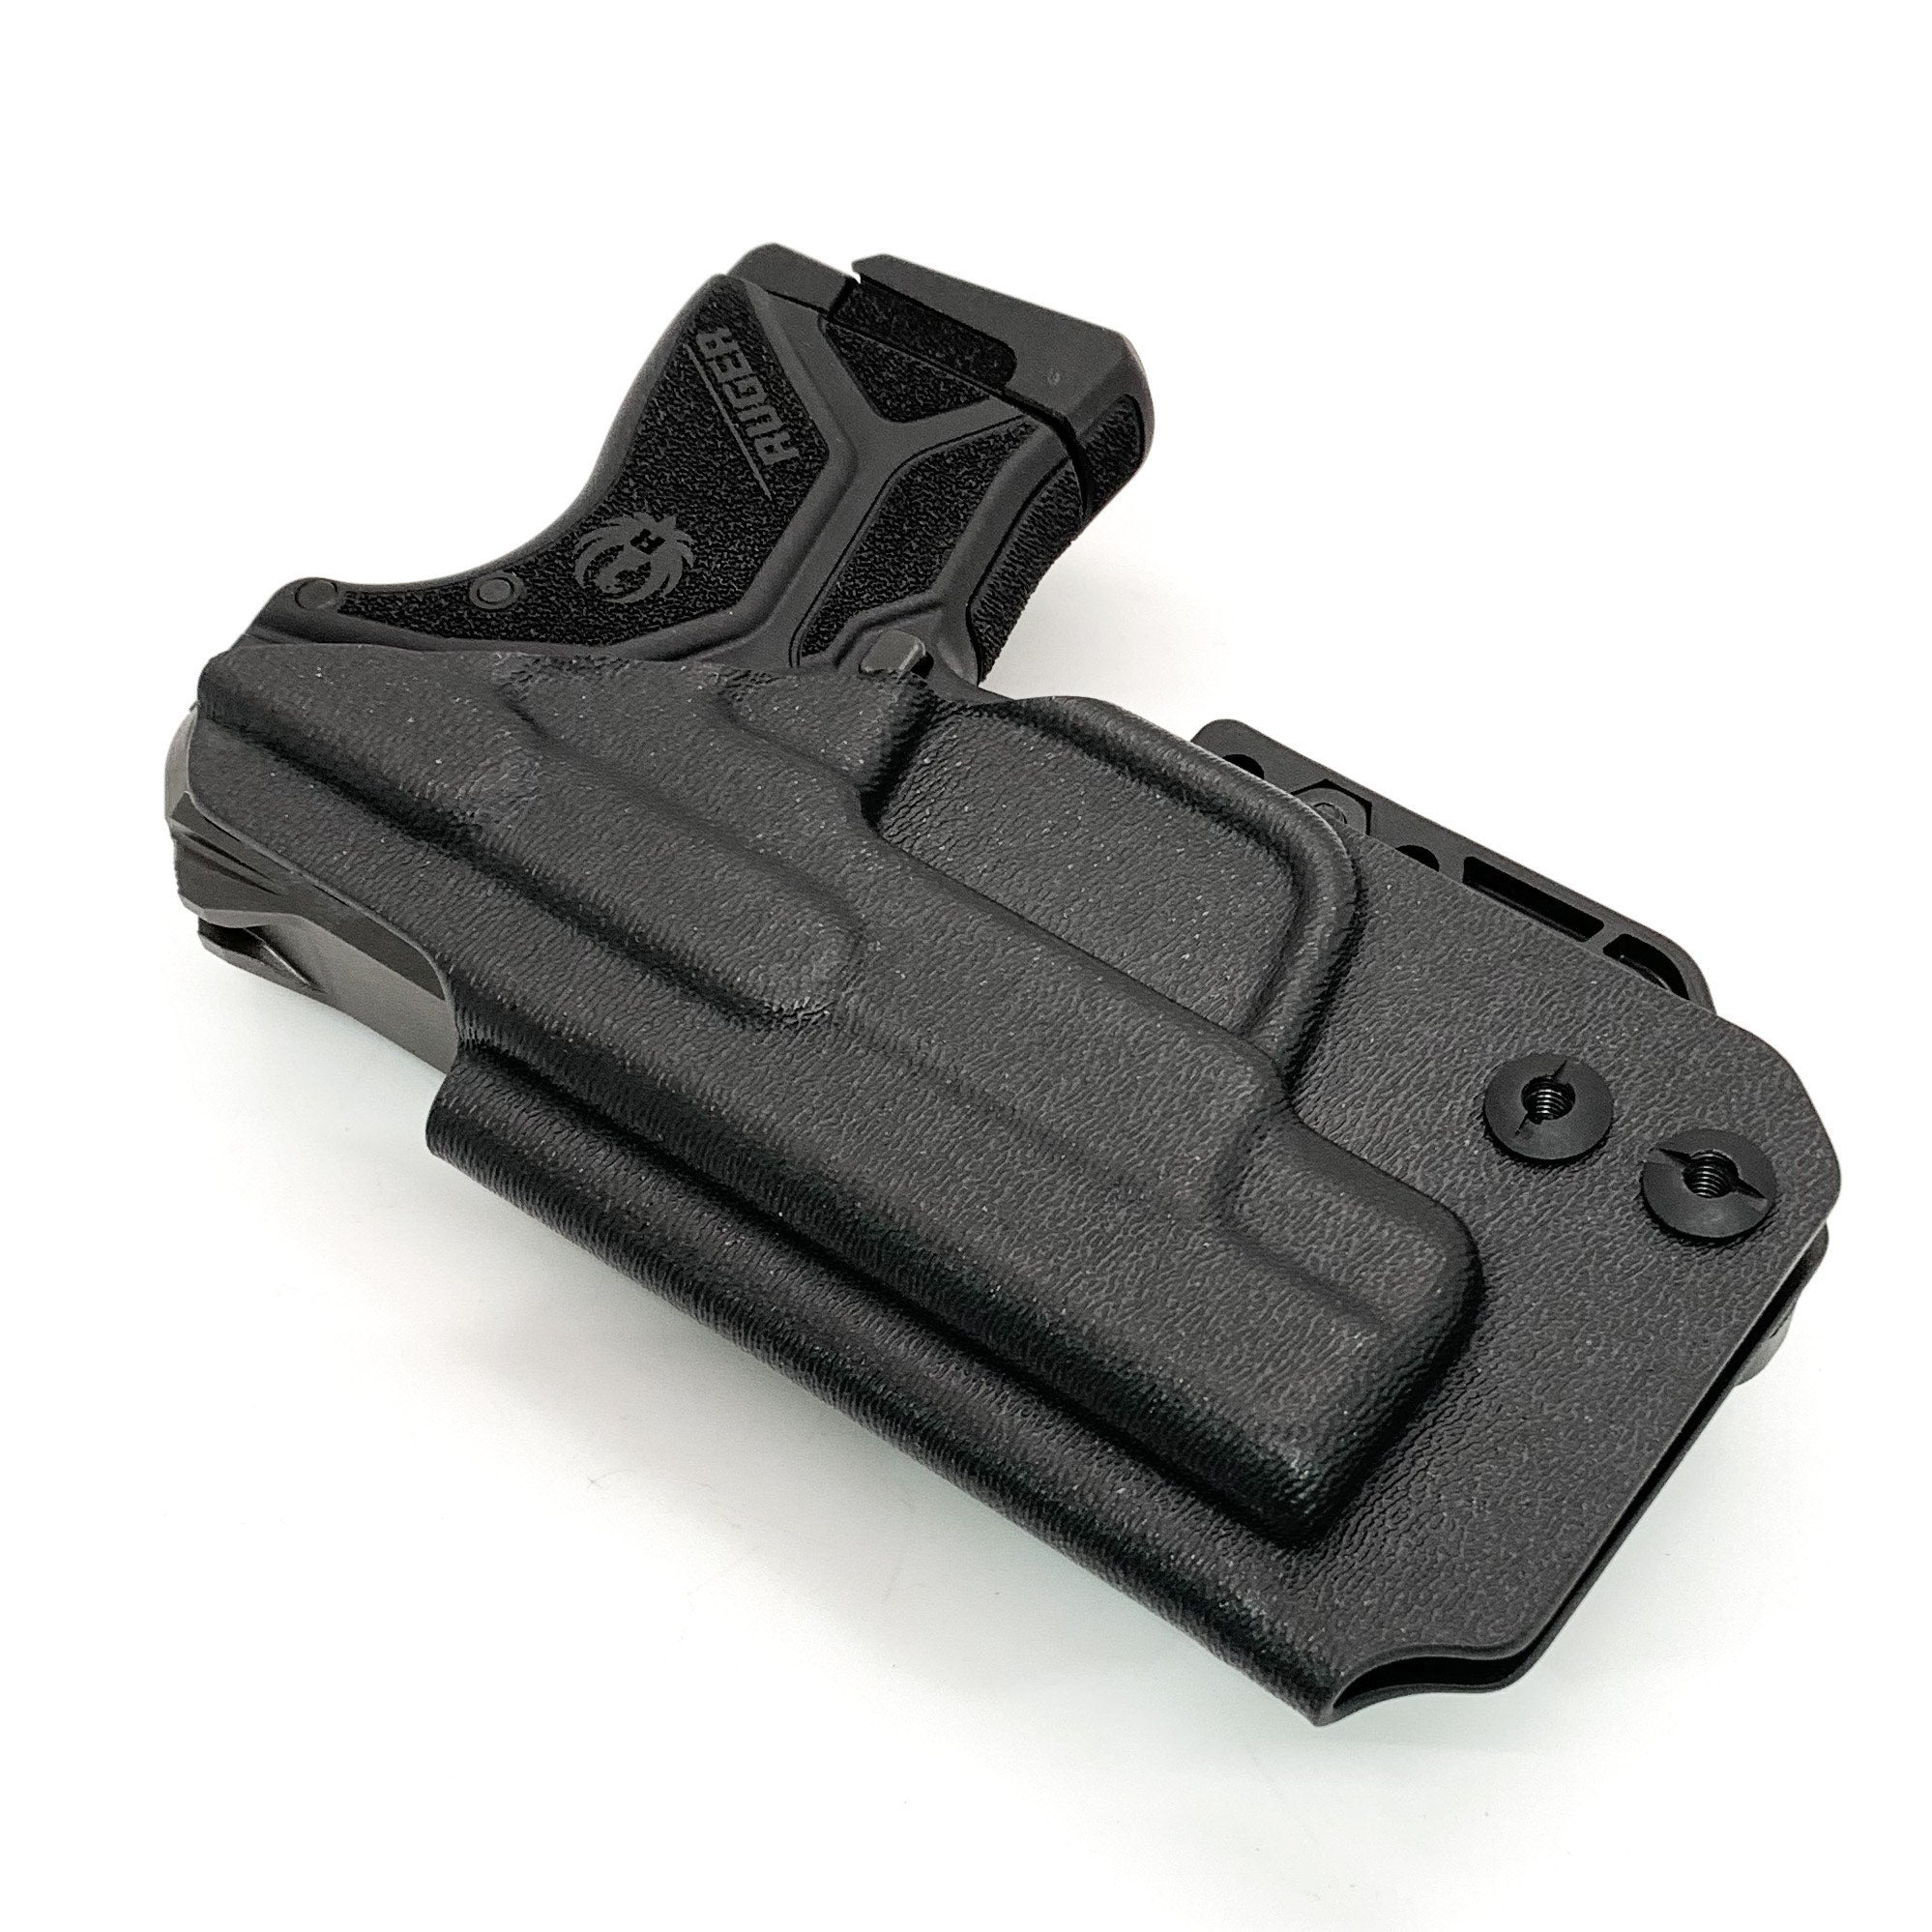 Inside waistband holster designed for the Ruger LCP II pistol Our holsters are vacuum formed with a precision machined mold designed from a CAD model of the actual firearm. Each holster is formed, trimmed, and folded in-house. Final fit and function tests are done with the actual pistol to ensure the holster fits the gun and has the correct amount of retention. The holster's retention is easily adjusted so that the fit can be dialed into your personal preference